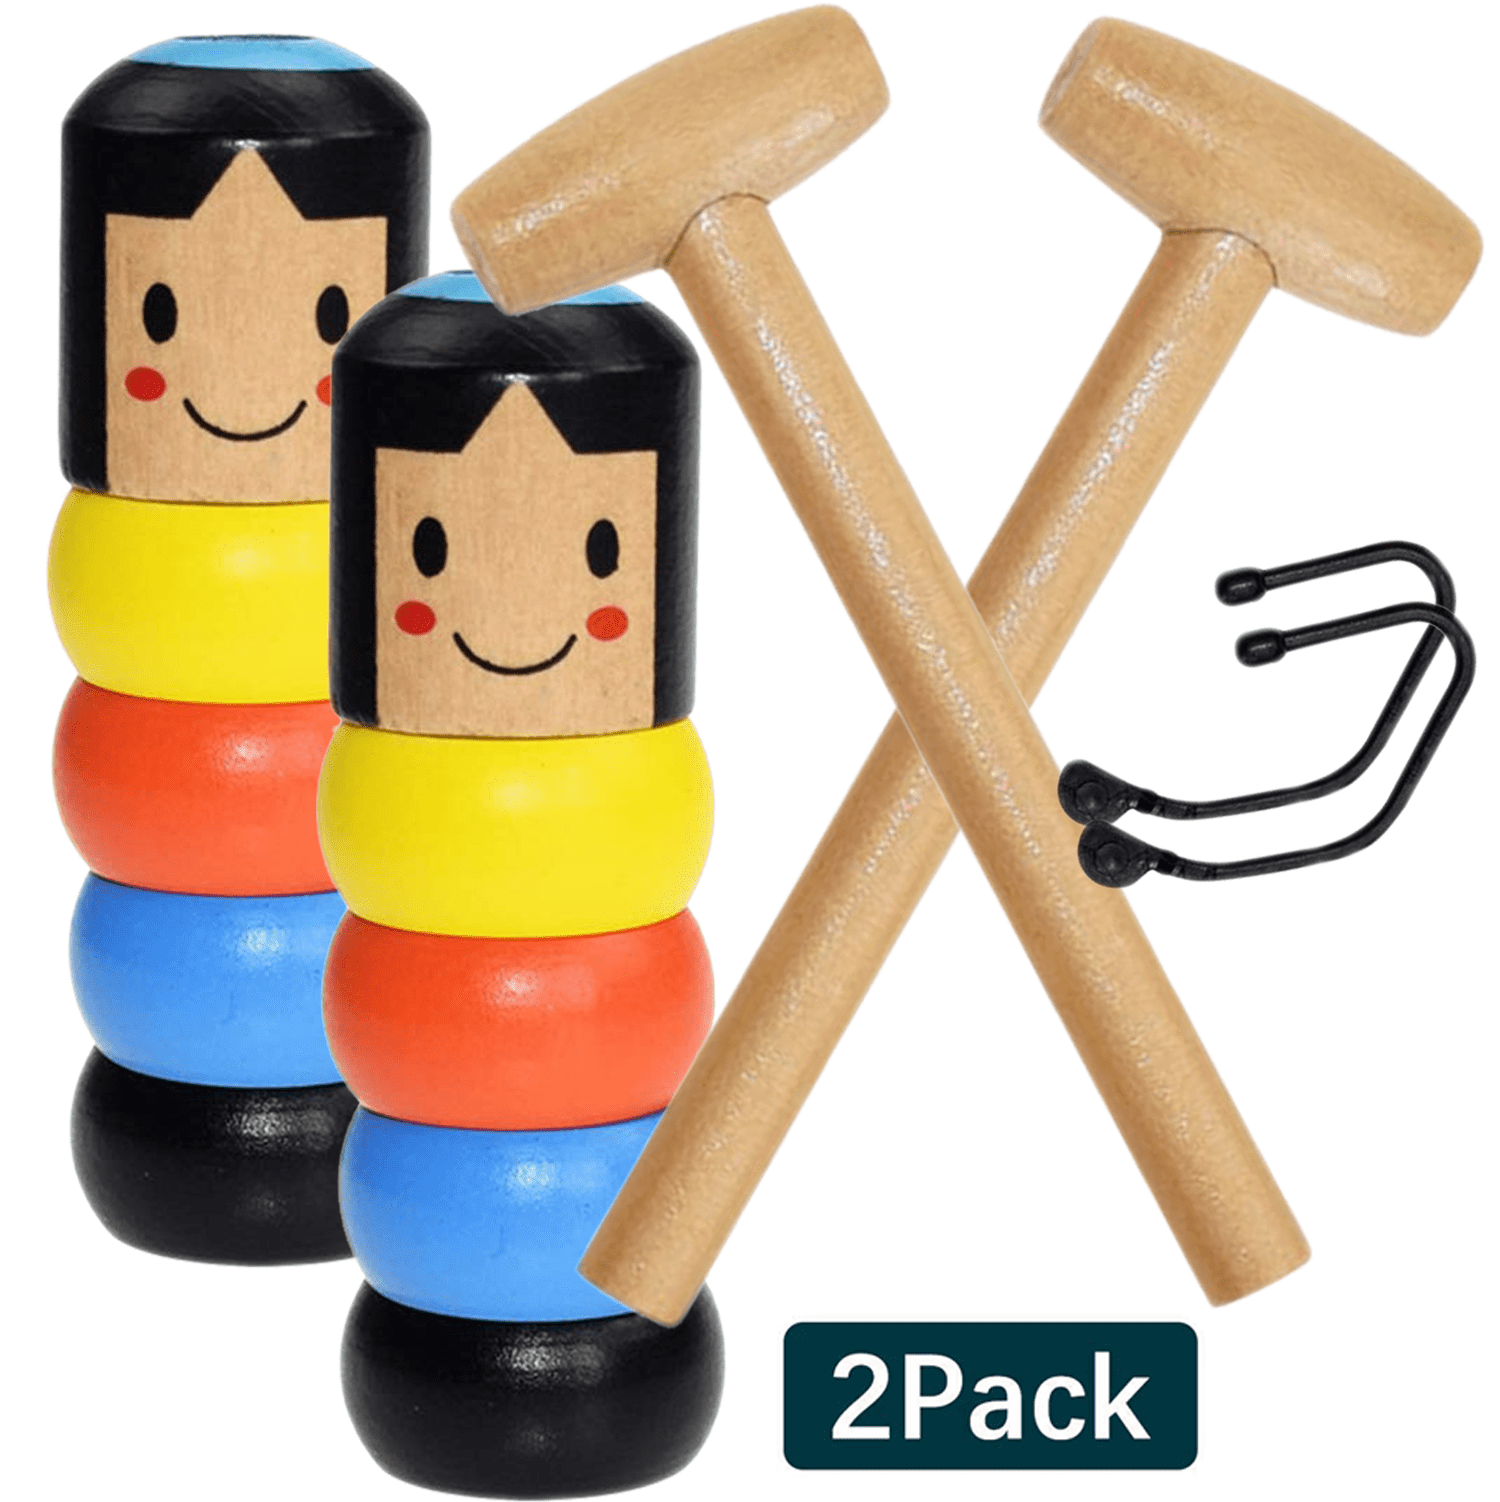 JUMOWA 2 Pack Unbreakable Wooden Man Magic Toy Immortal Daruma Magic Tricks Funny Toy Never Fall Down Immortal Stage Magic Props Funny Wooden Magic Toy Gift for Kids